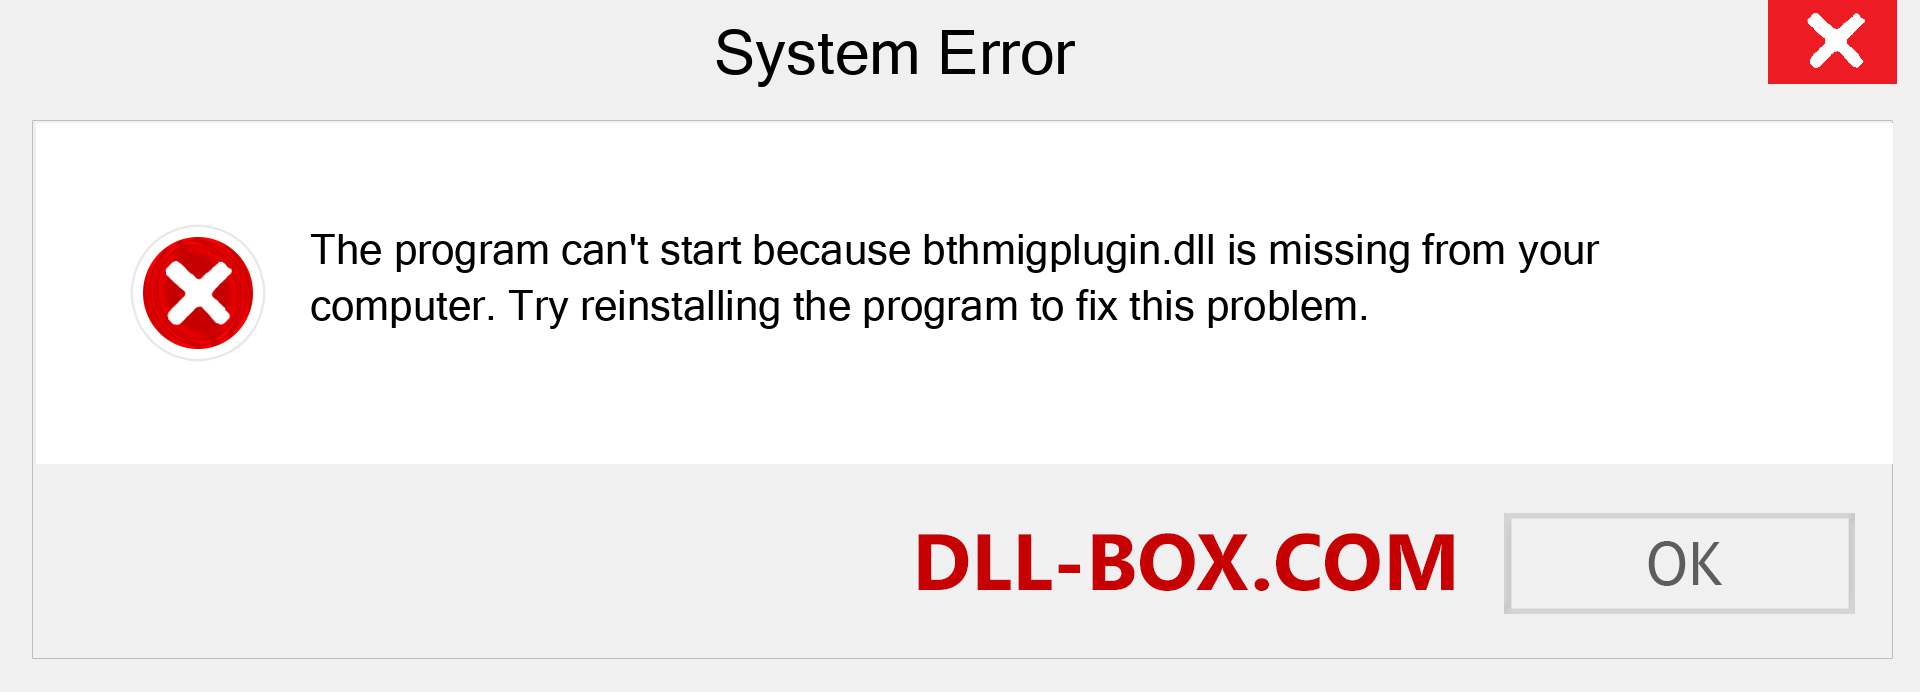  bthmigplugin.dll file is missing?. Download for Windows 7, 8, 10 - Fix  bthmigplugin dll Missing Error on Windows, photos, images